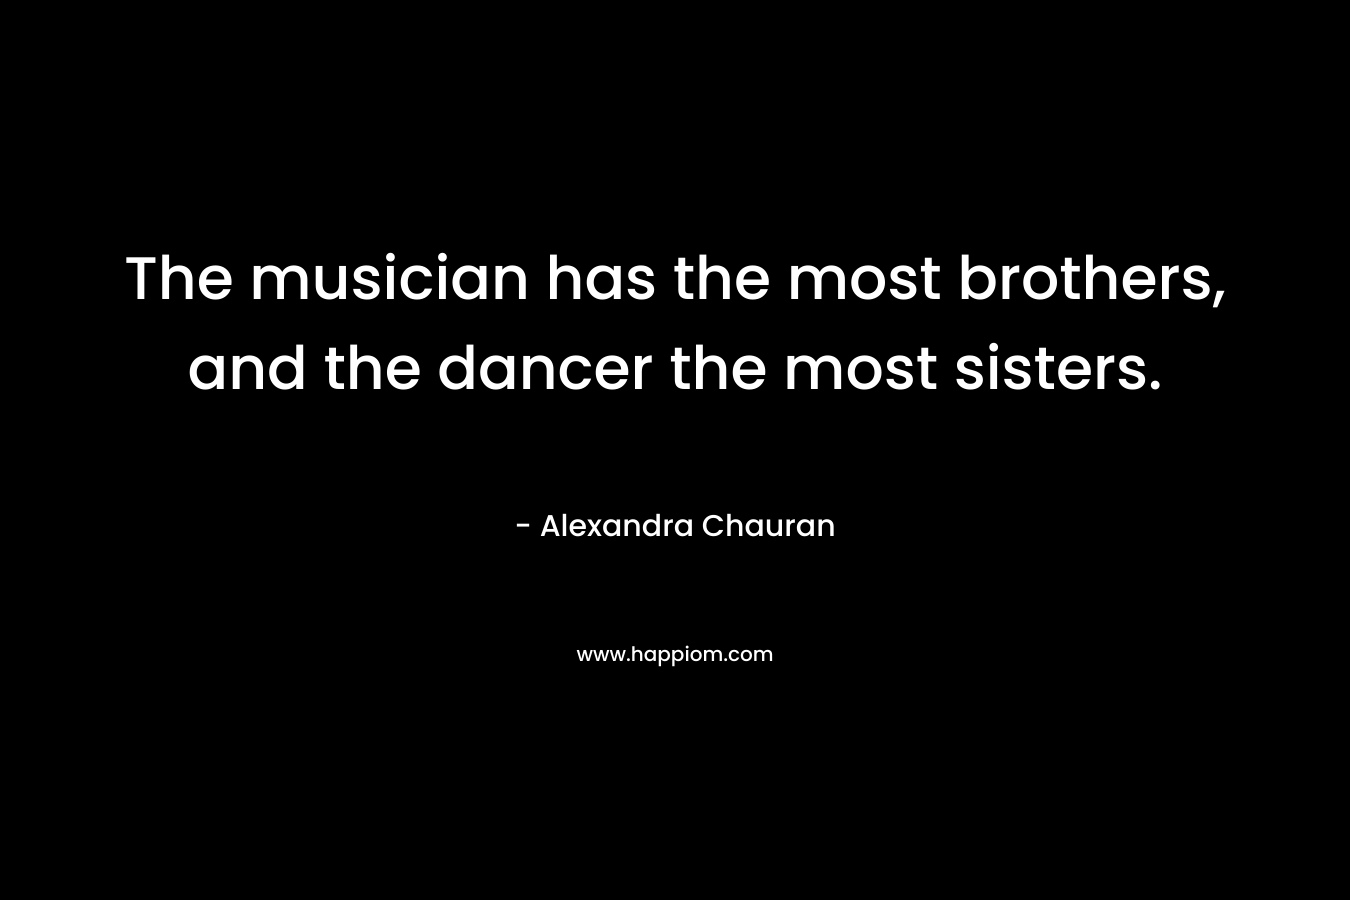 The musician has the most brothers, and the dancer the most sisters.